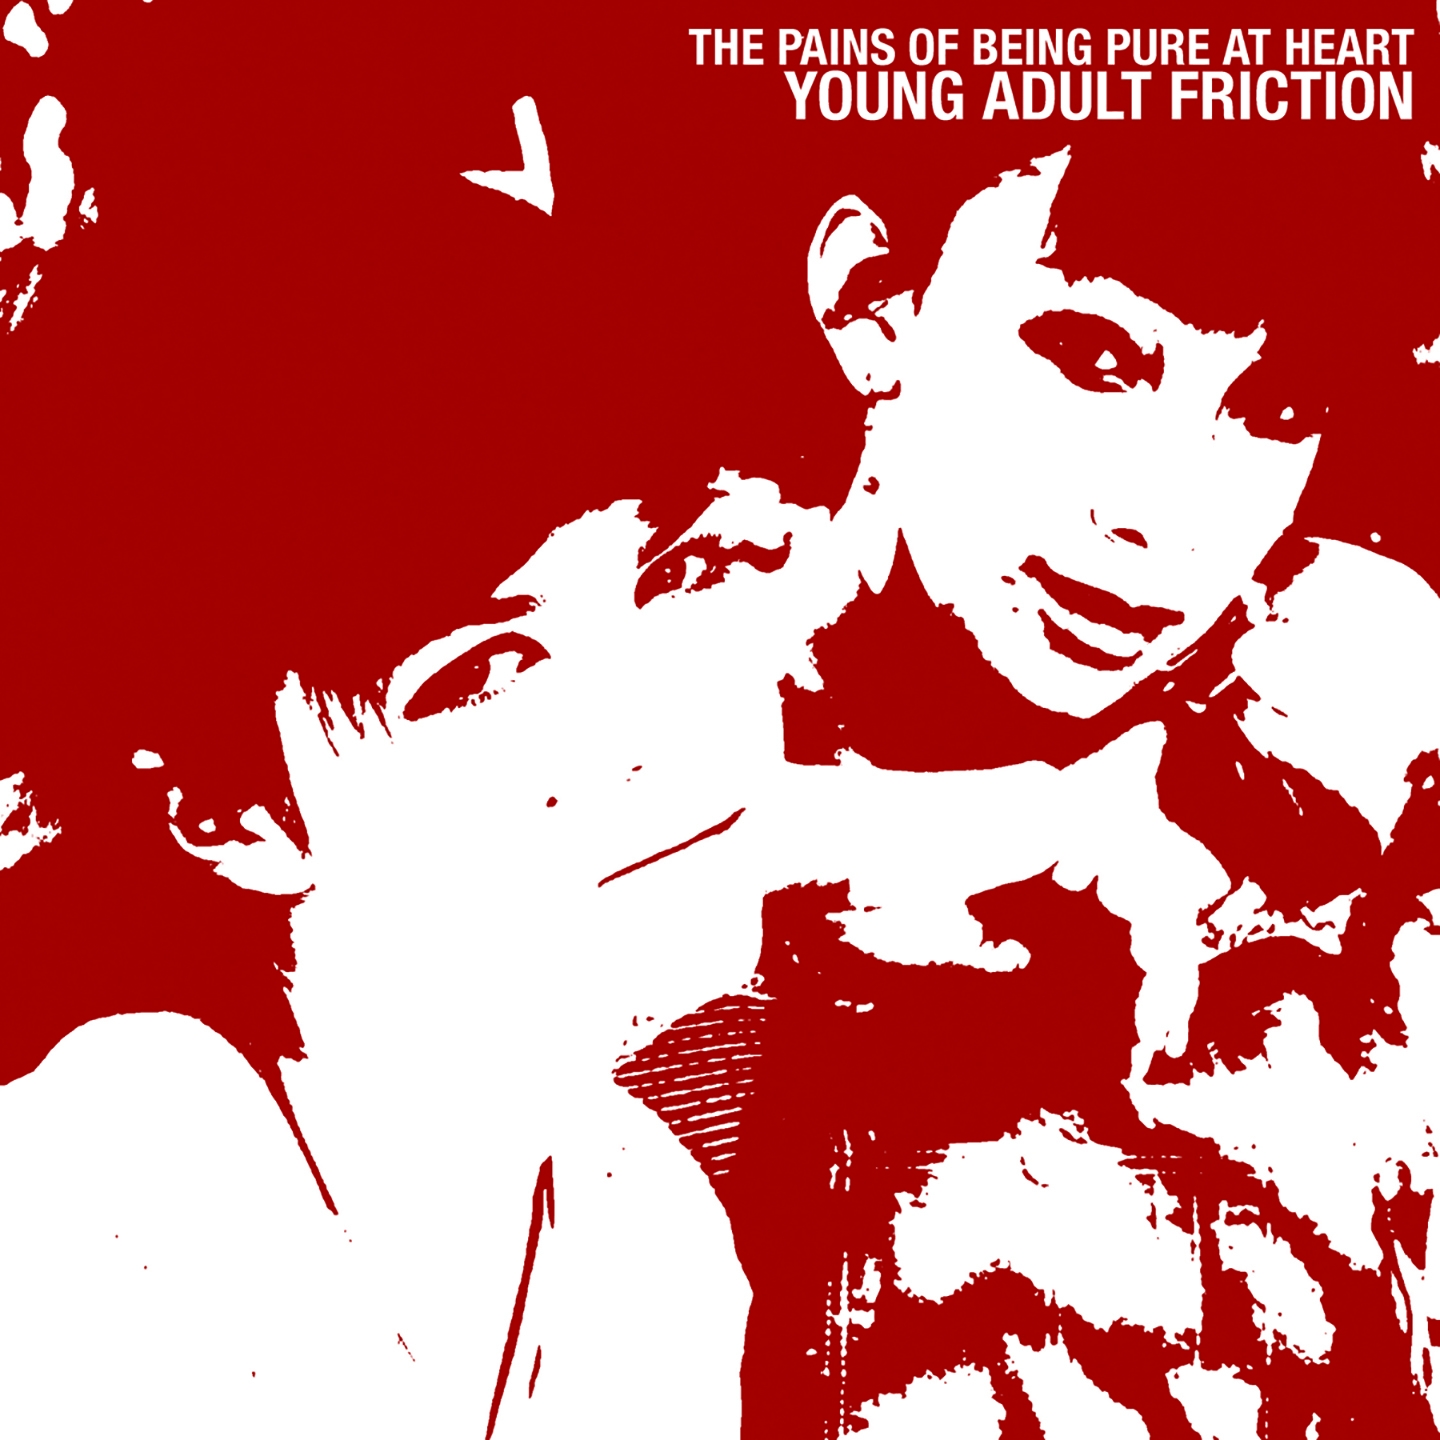 Young Adult Friction (radio edit)